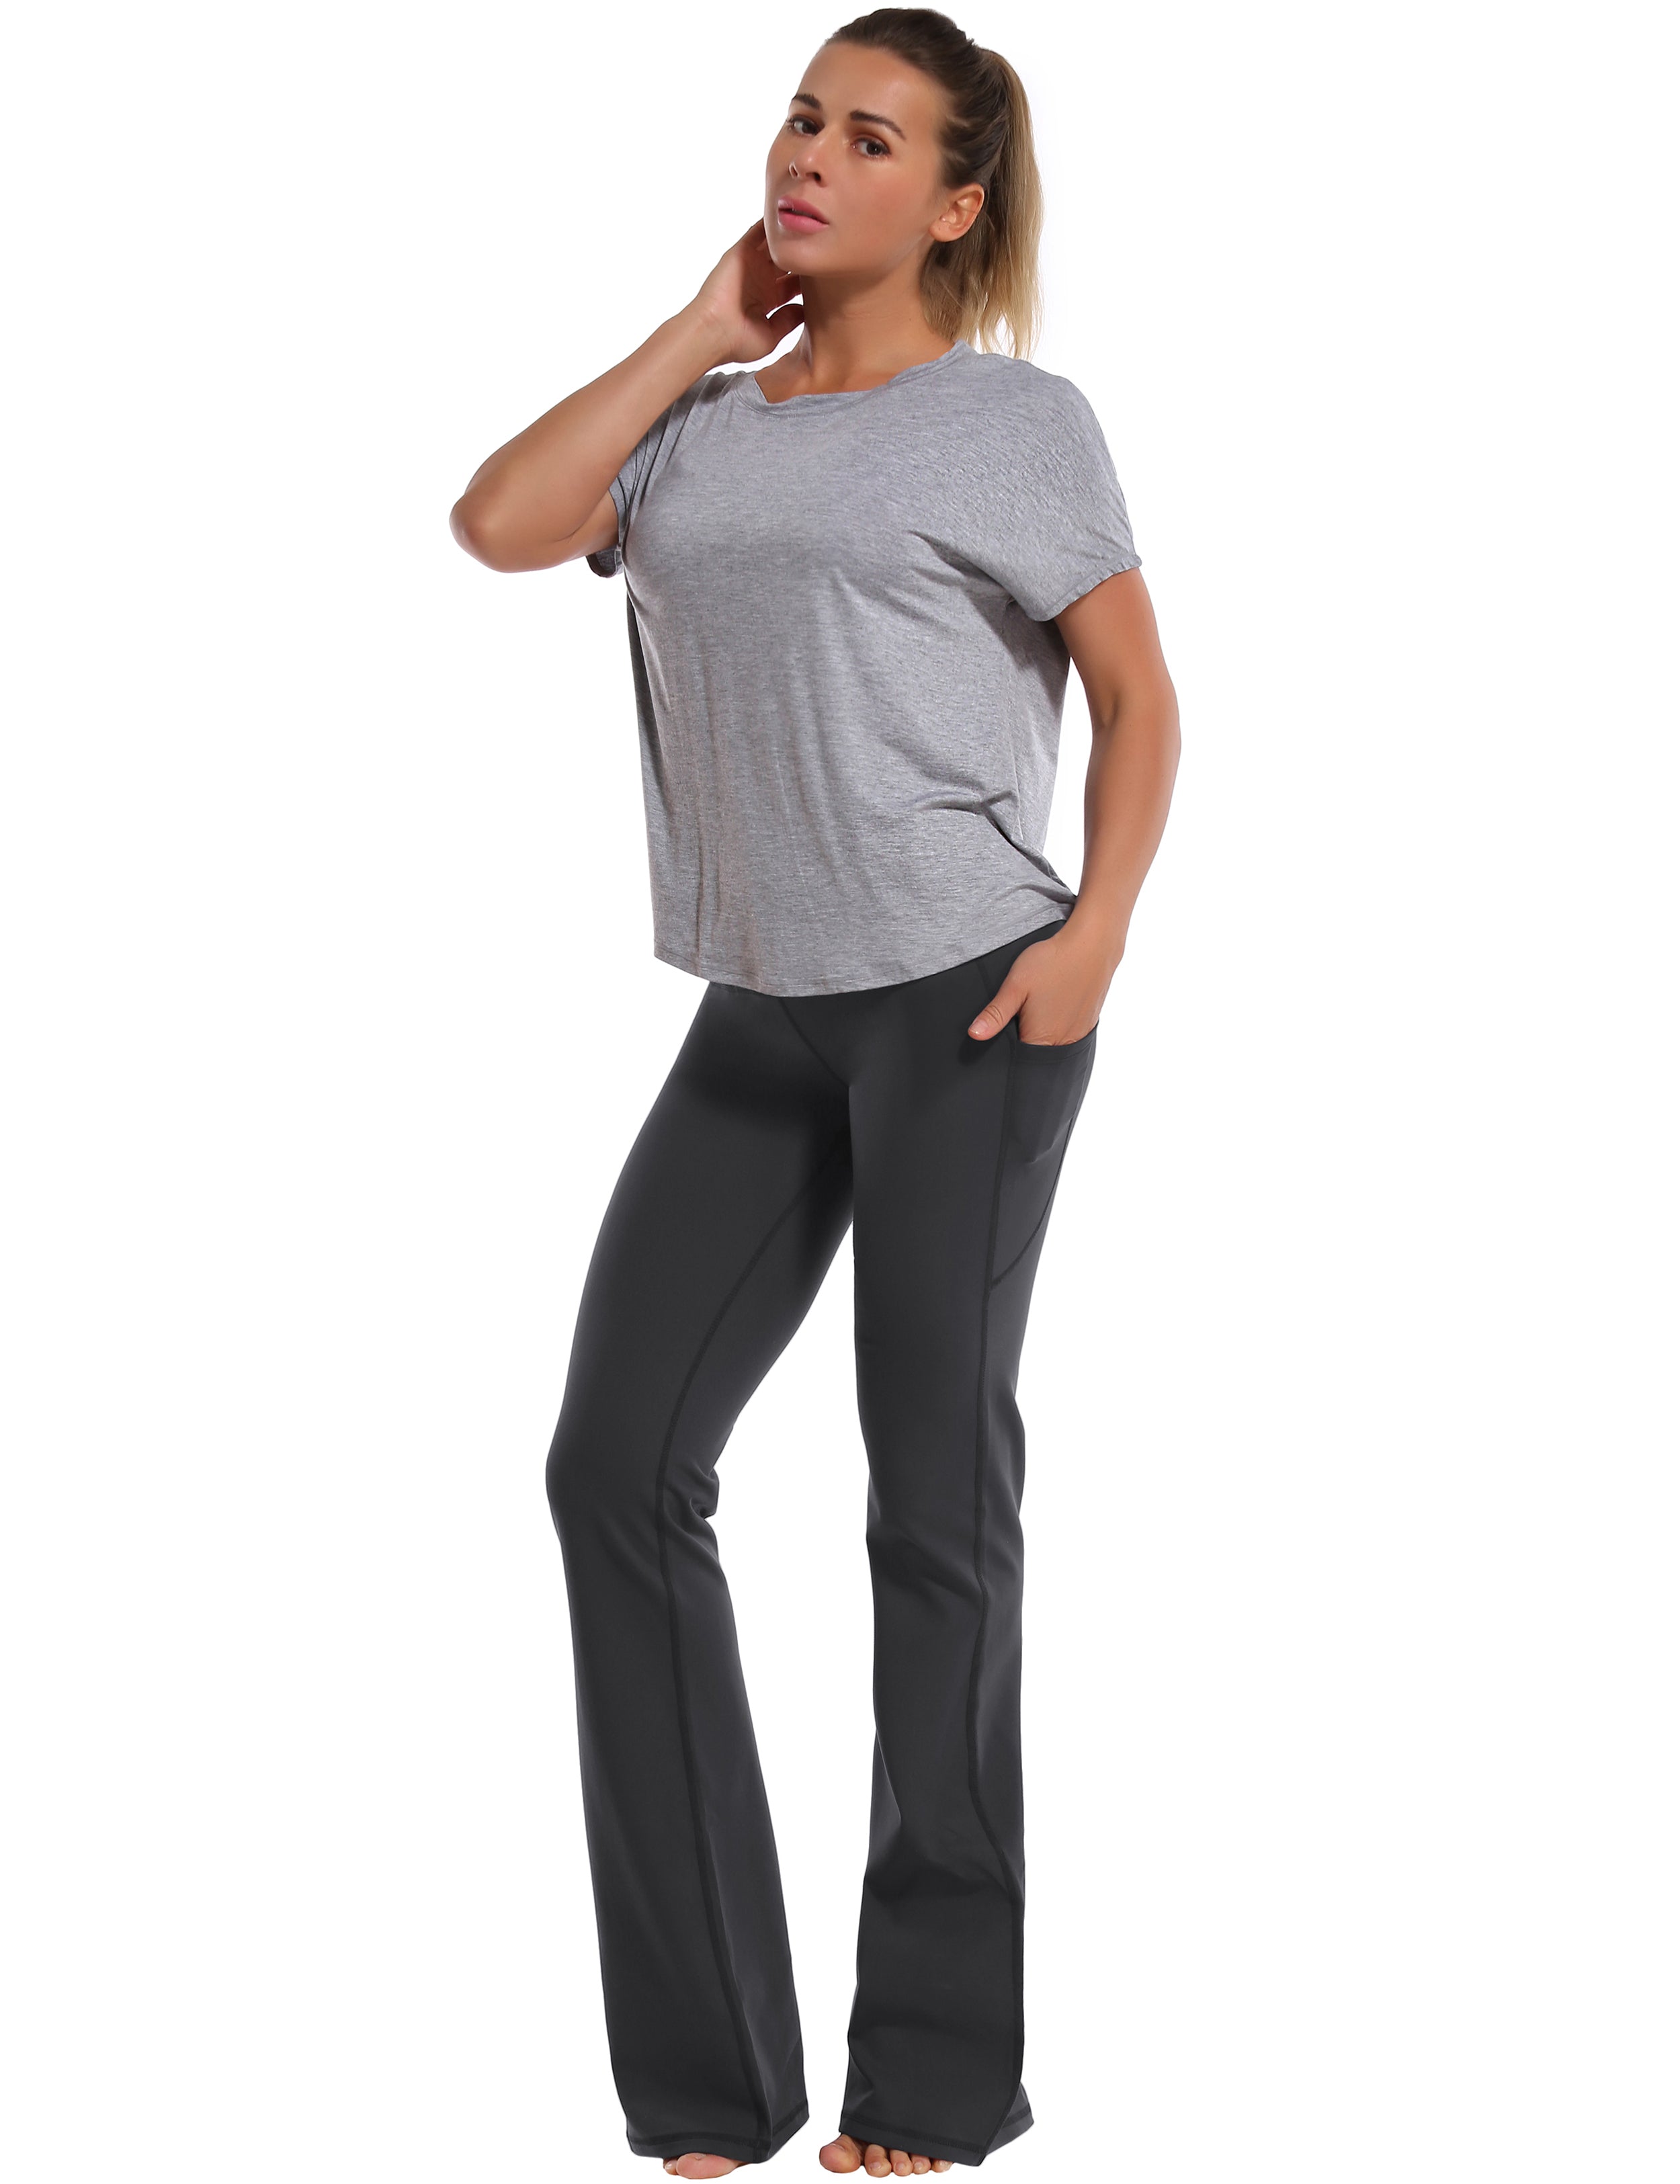 139 Side Pockets Bootcut Leggings shadowcharcoal 87%Nylon/13%Spandex Fabric doesn't attract lint easily 4-way stretch No see-through Moisture-wicking Tummy control Inner pocket Four lengths